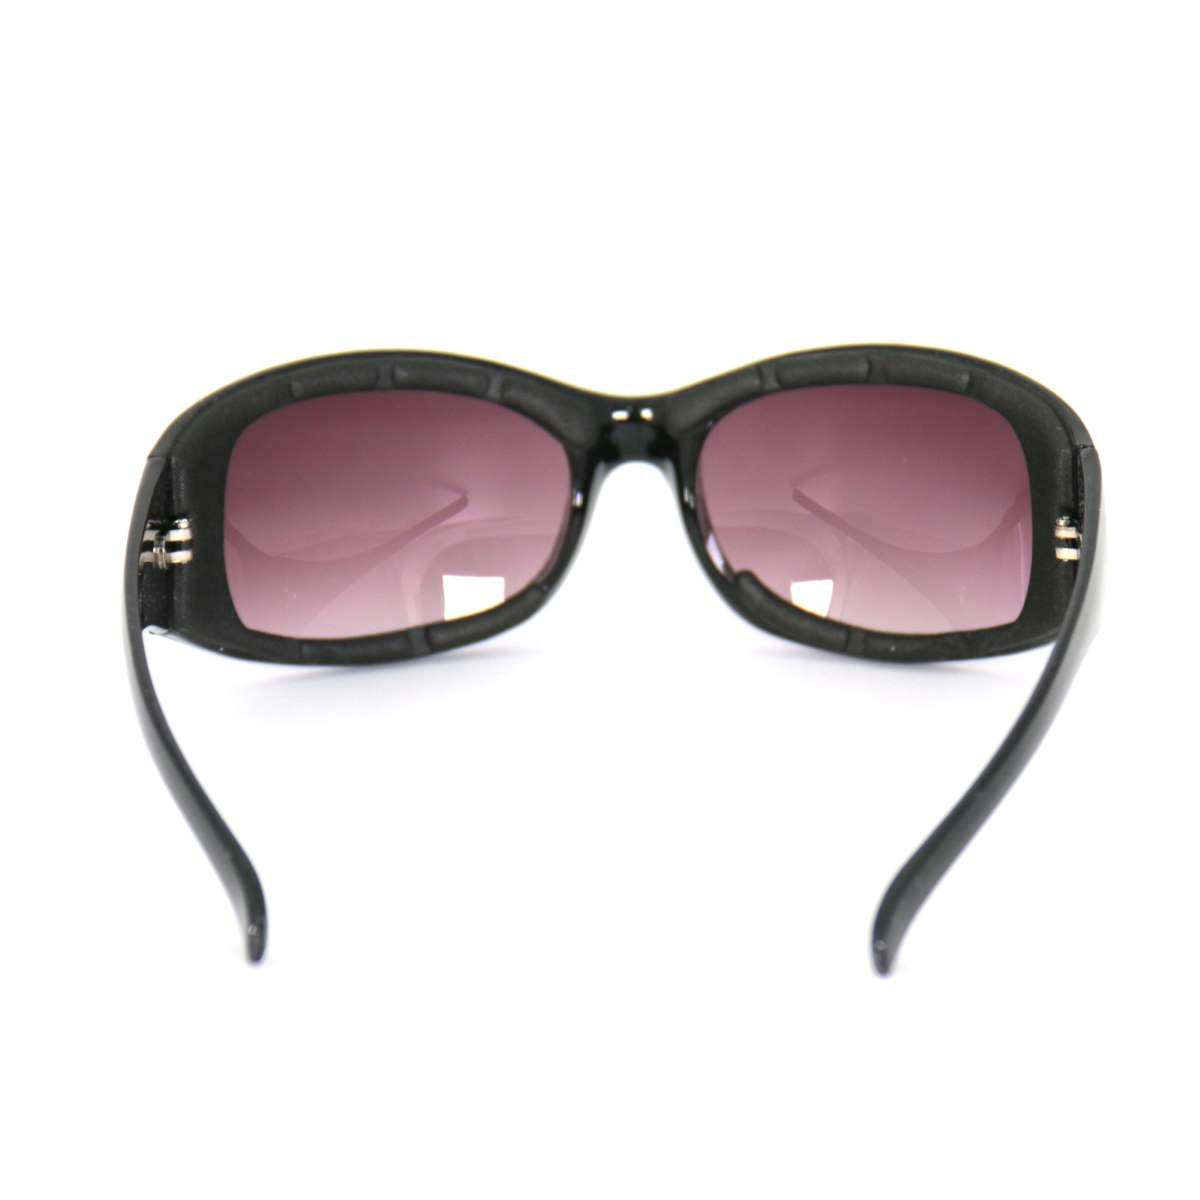 Hot Leathers Bling Sunglasses with Foam Padding and Smoke Lenses SGL2048